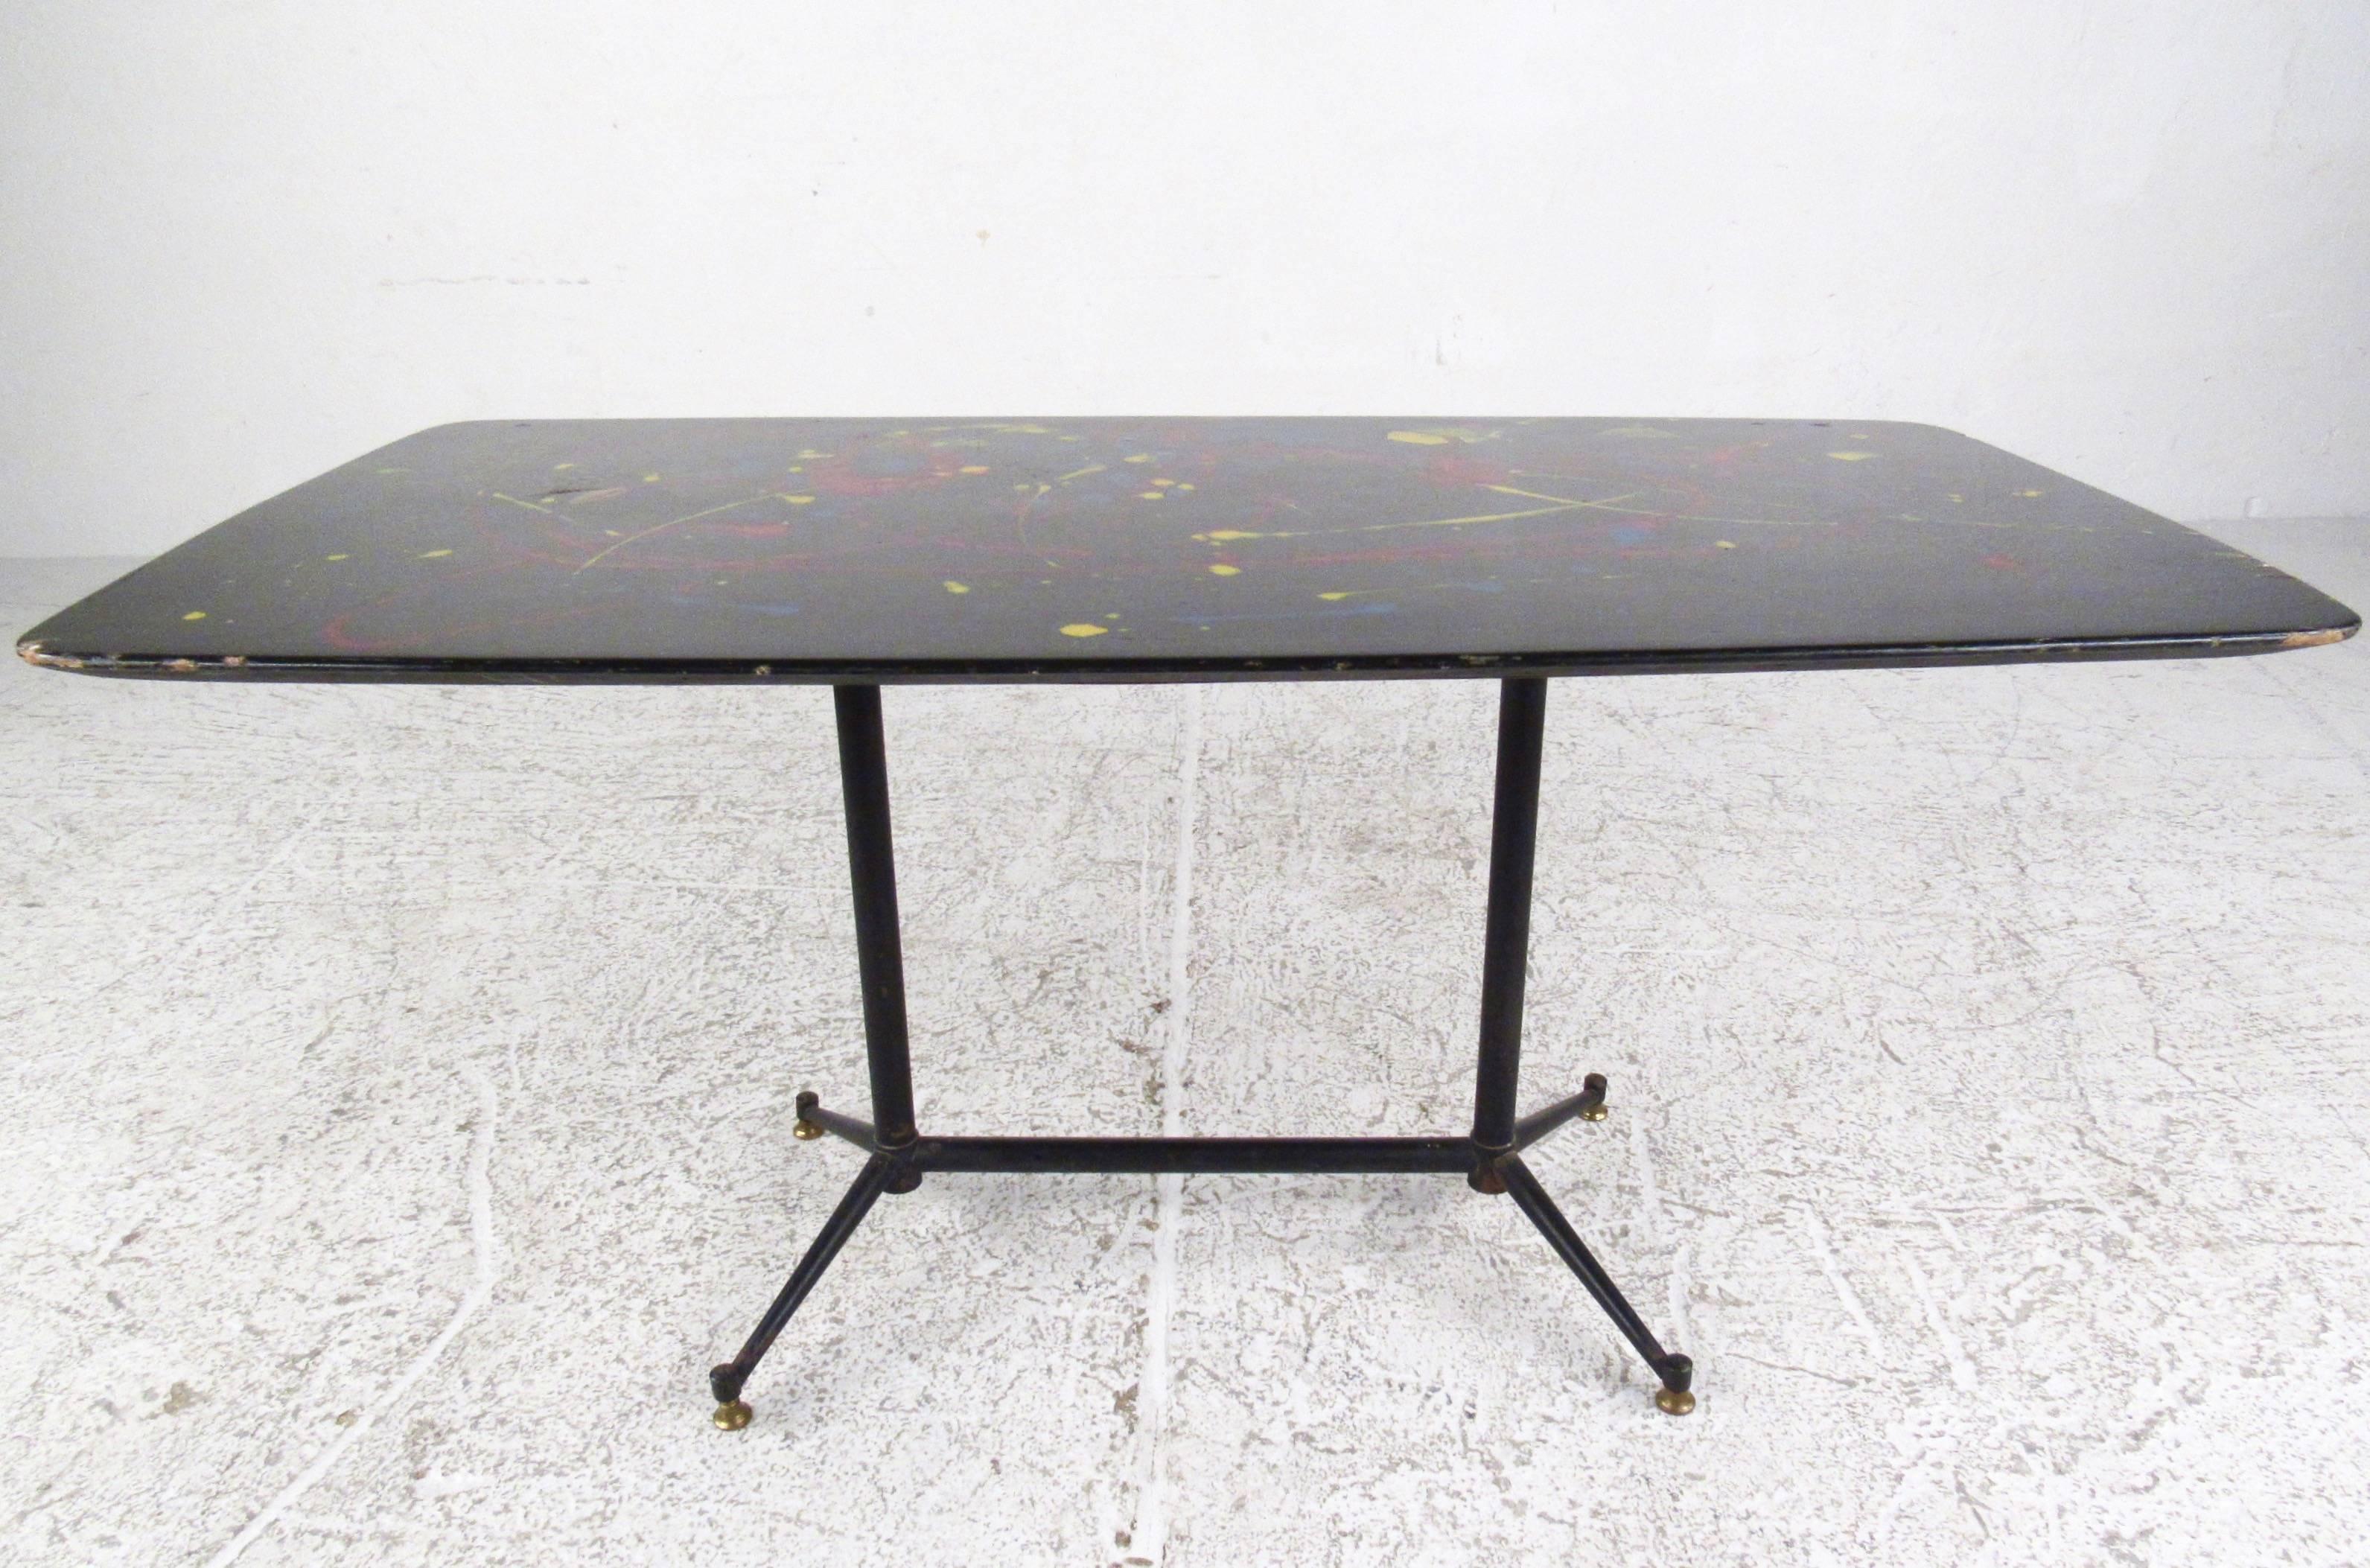 This unique Mid-Century Modern Italian coffee table features a sleek and stylish metal base with multi-color painted top. Perfect cocktail height and petite size make this an ideal table for a variety of seating settings. Please confirm item